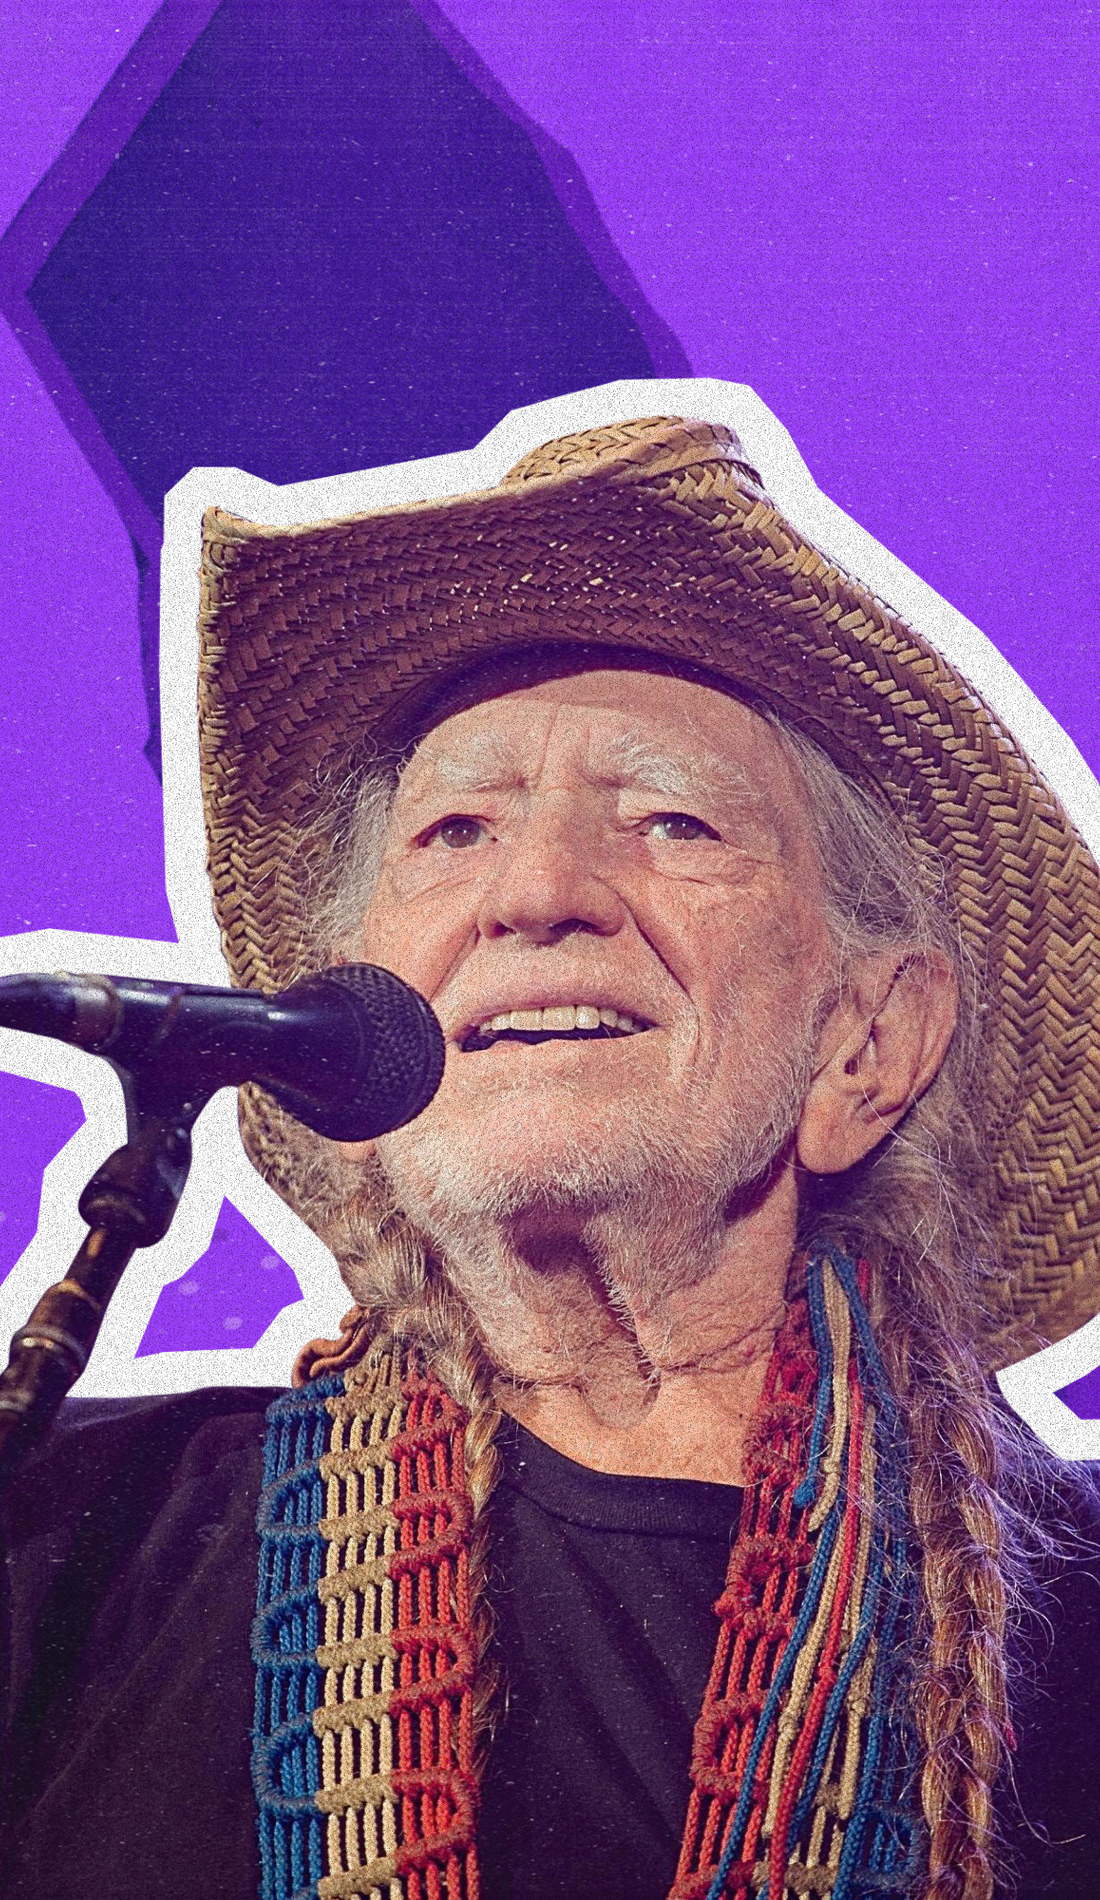 A Willie Nelson live event